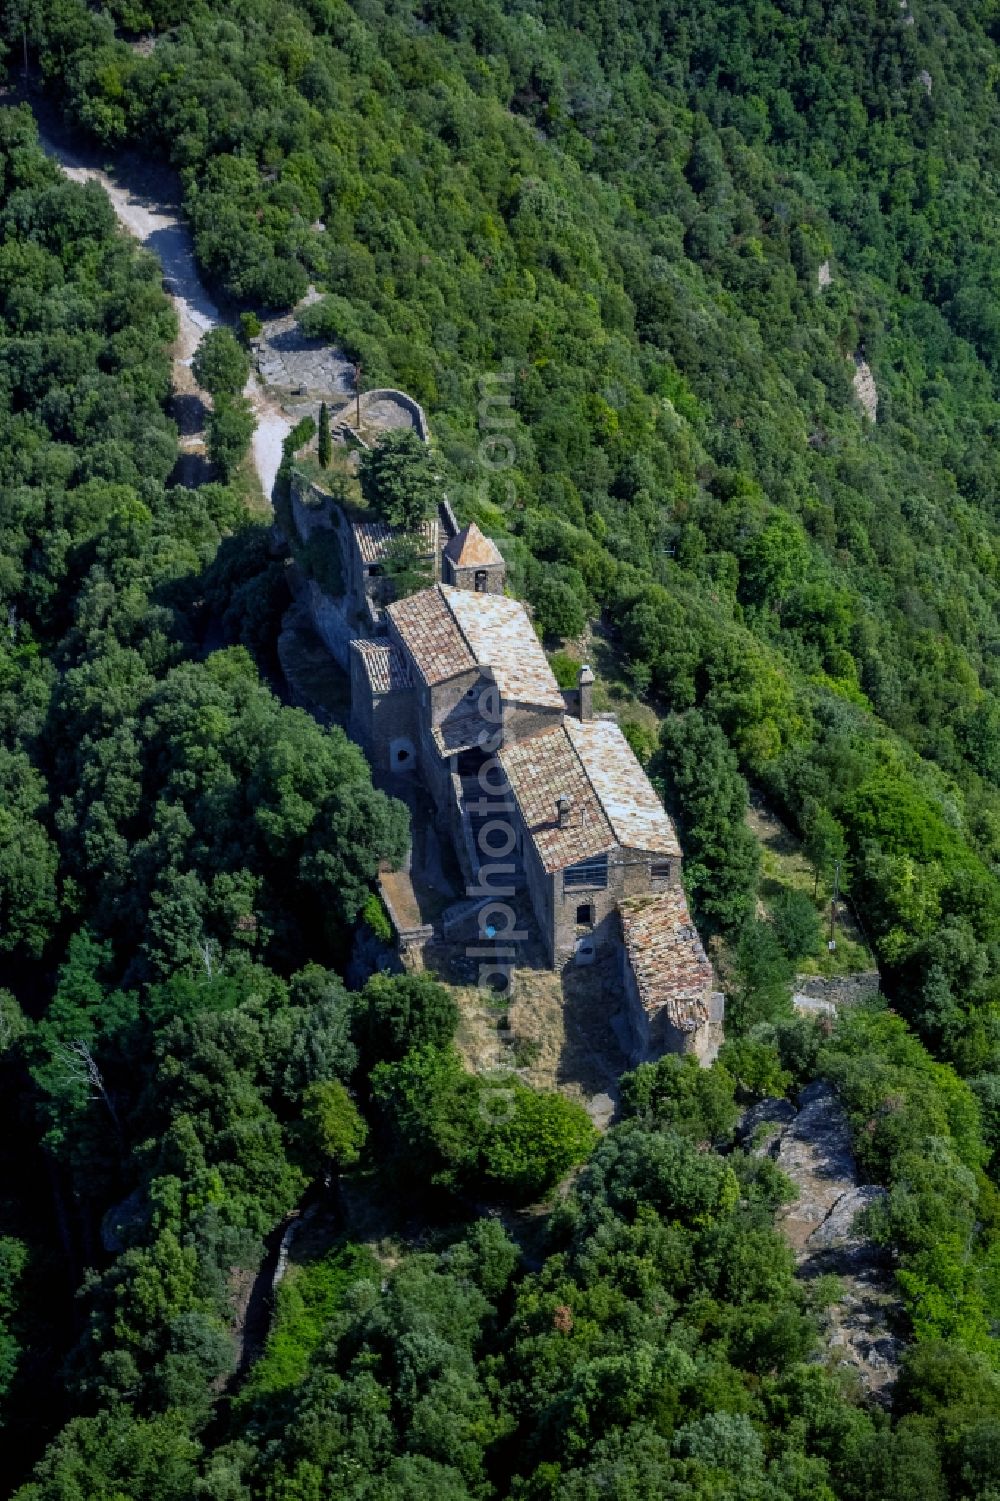 Aerial photograph Sant Marti de Llemena - View of the abbey Rocacorba in Sant Marti de Llemena in the Province of Girona in Spain